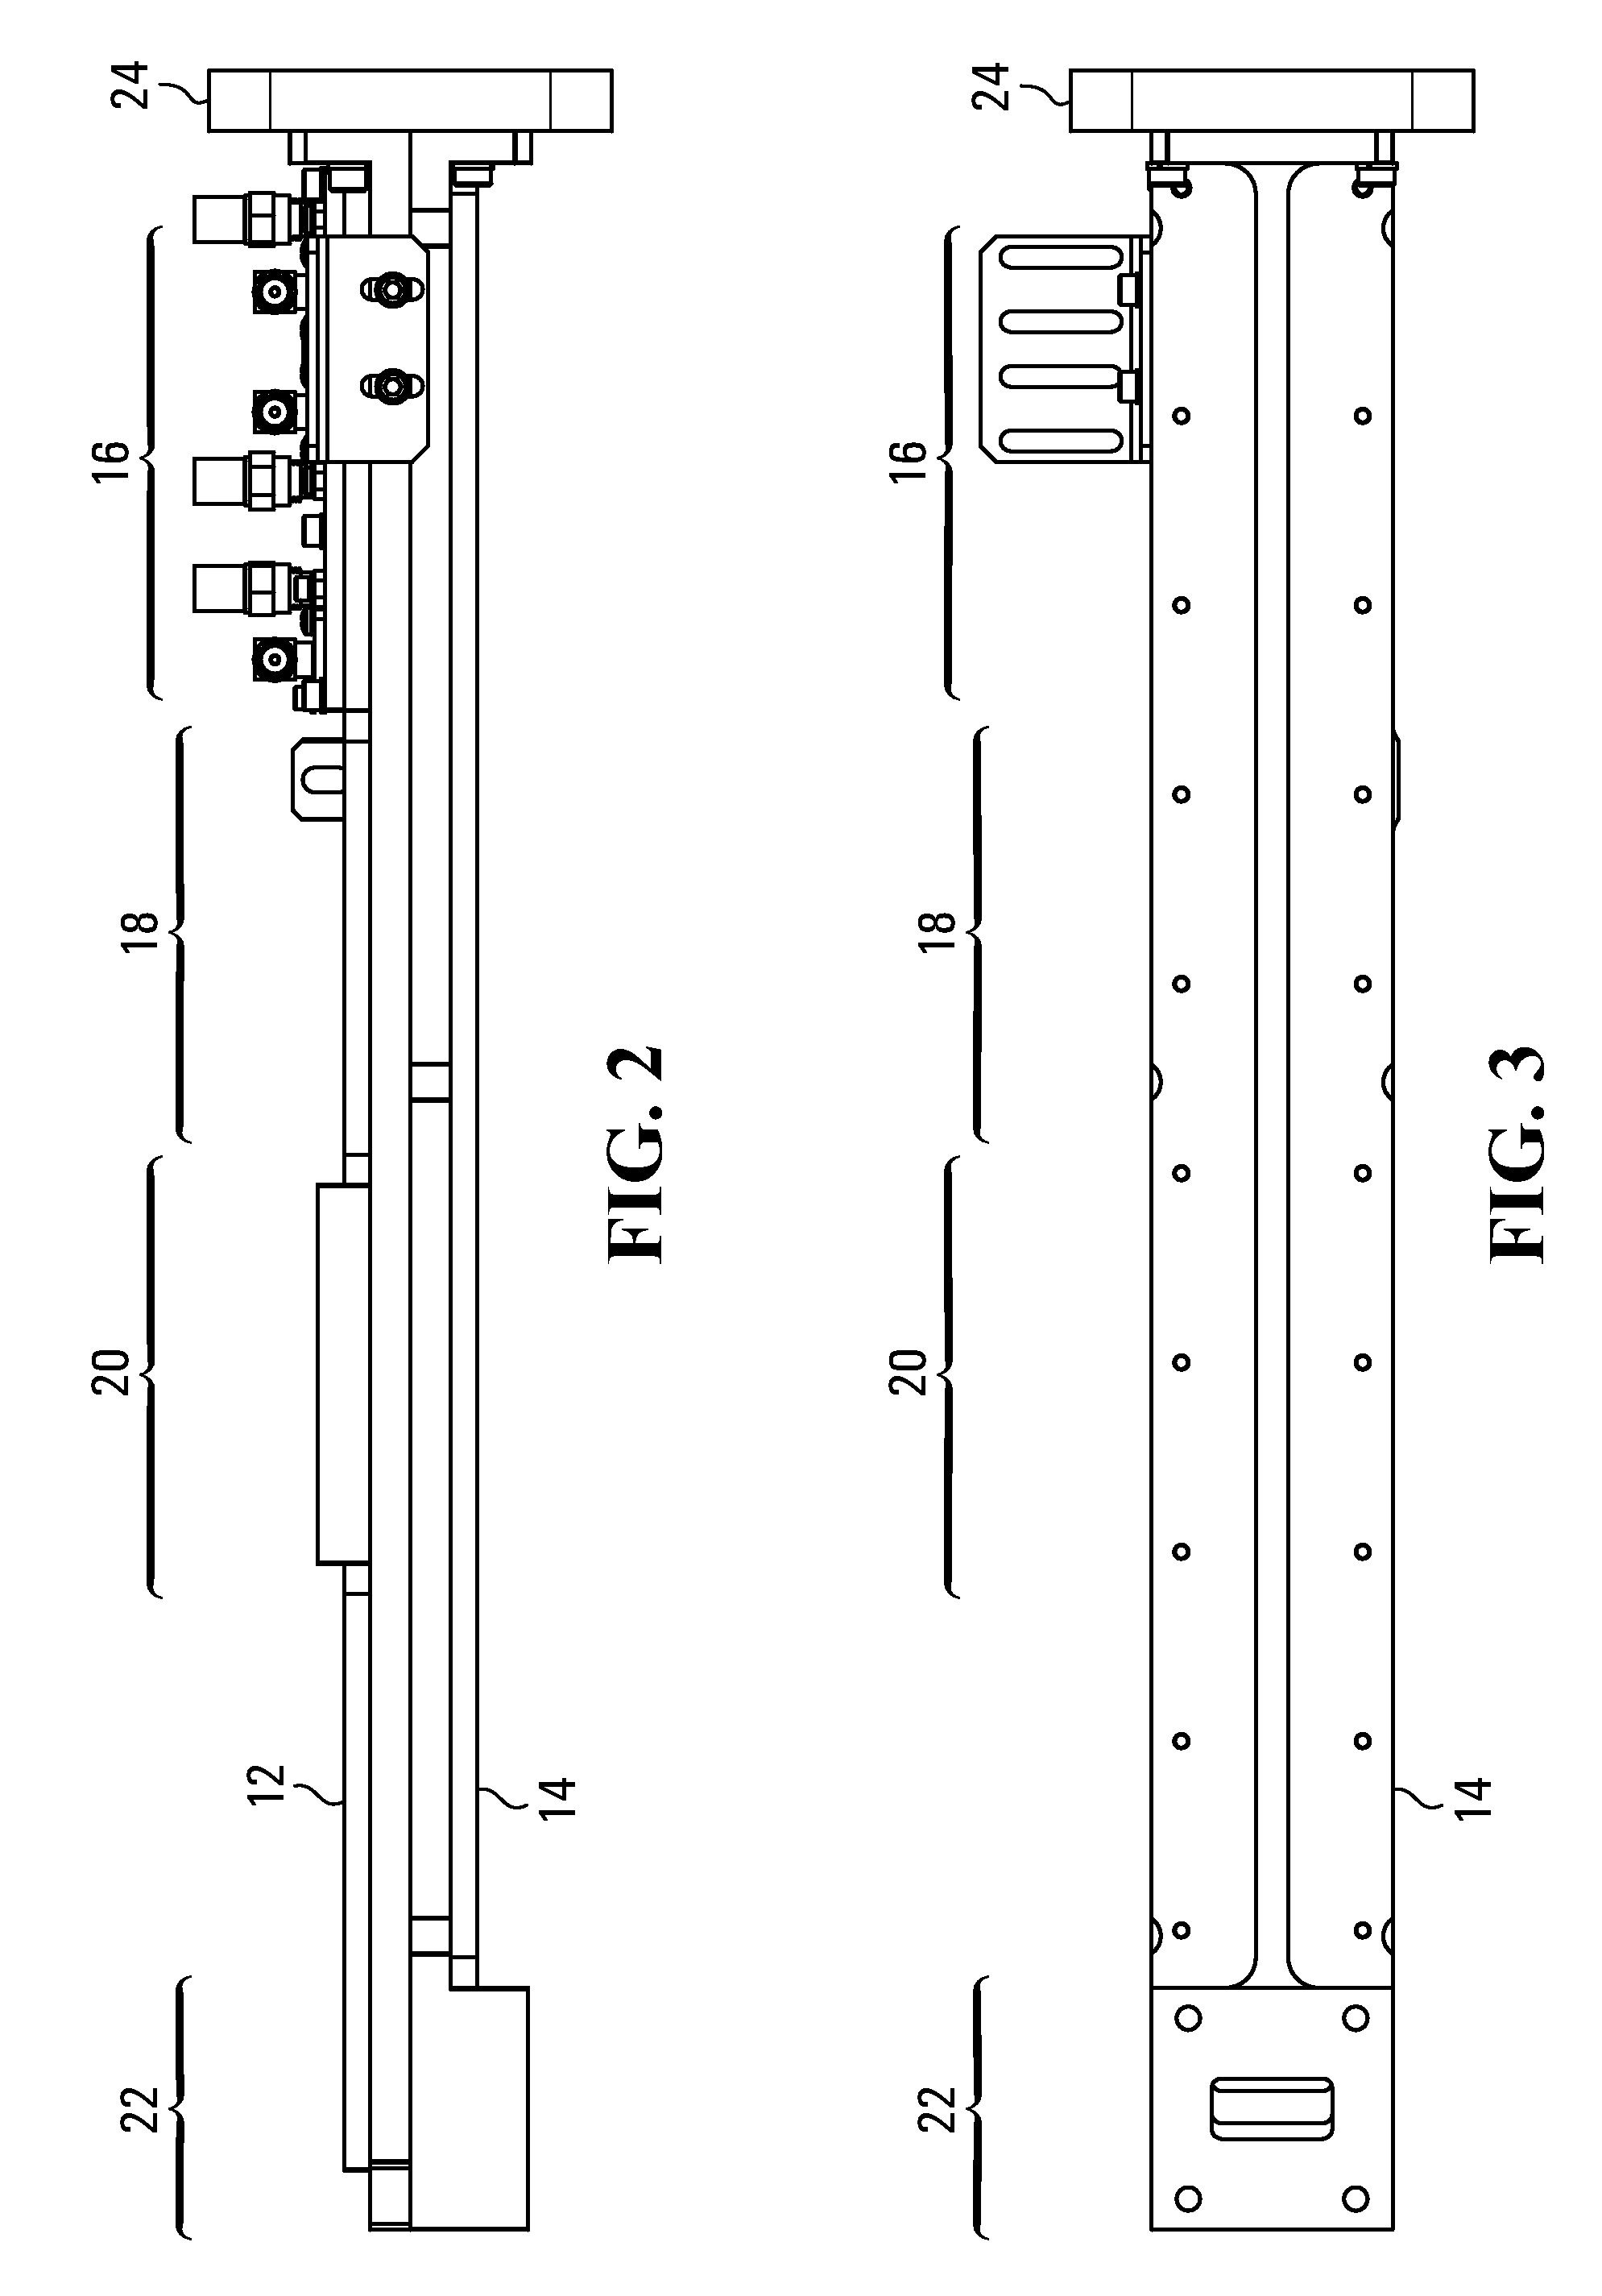 Multi-component waveguide assembly